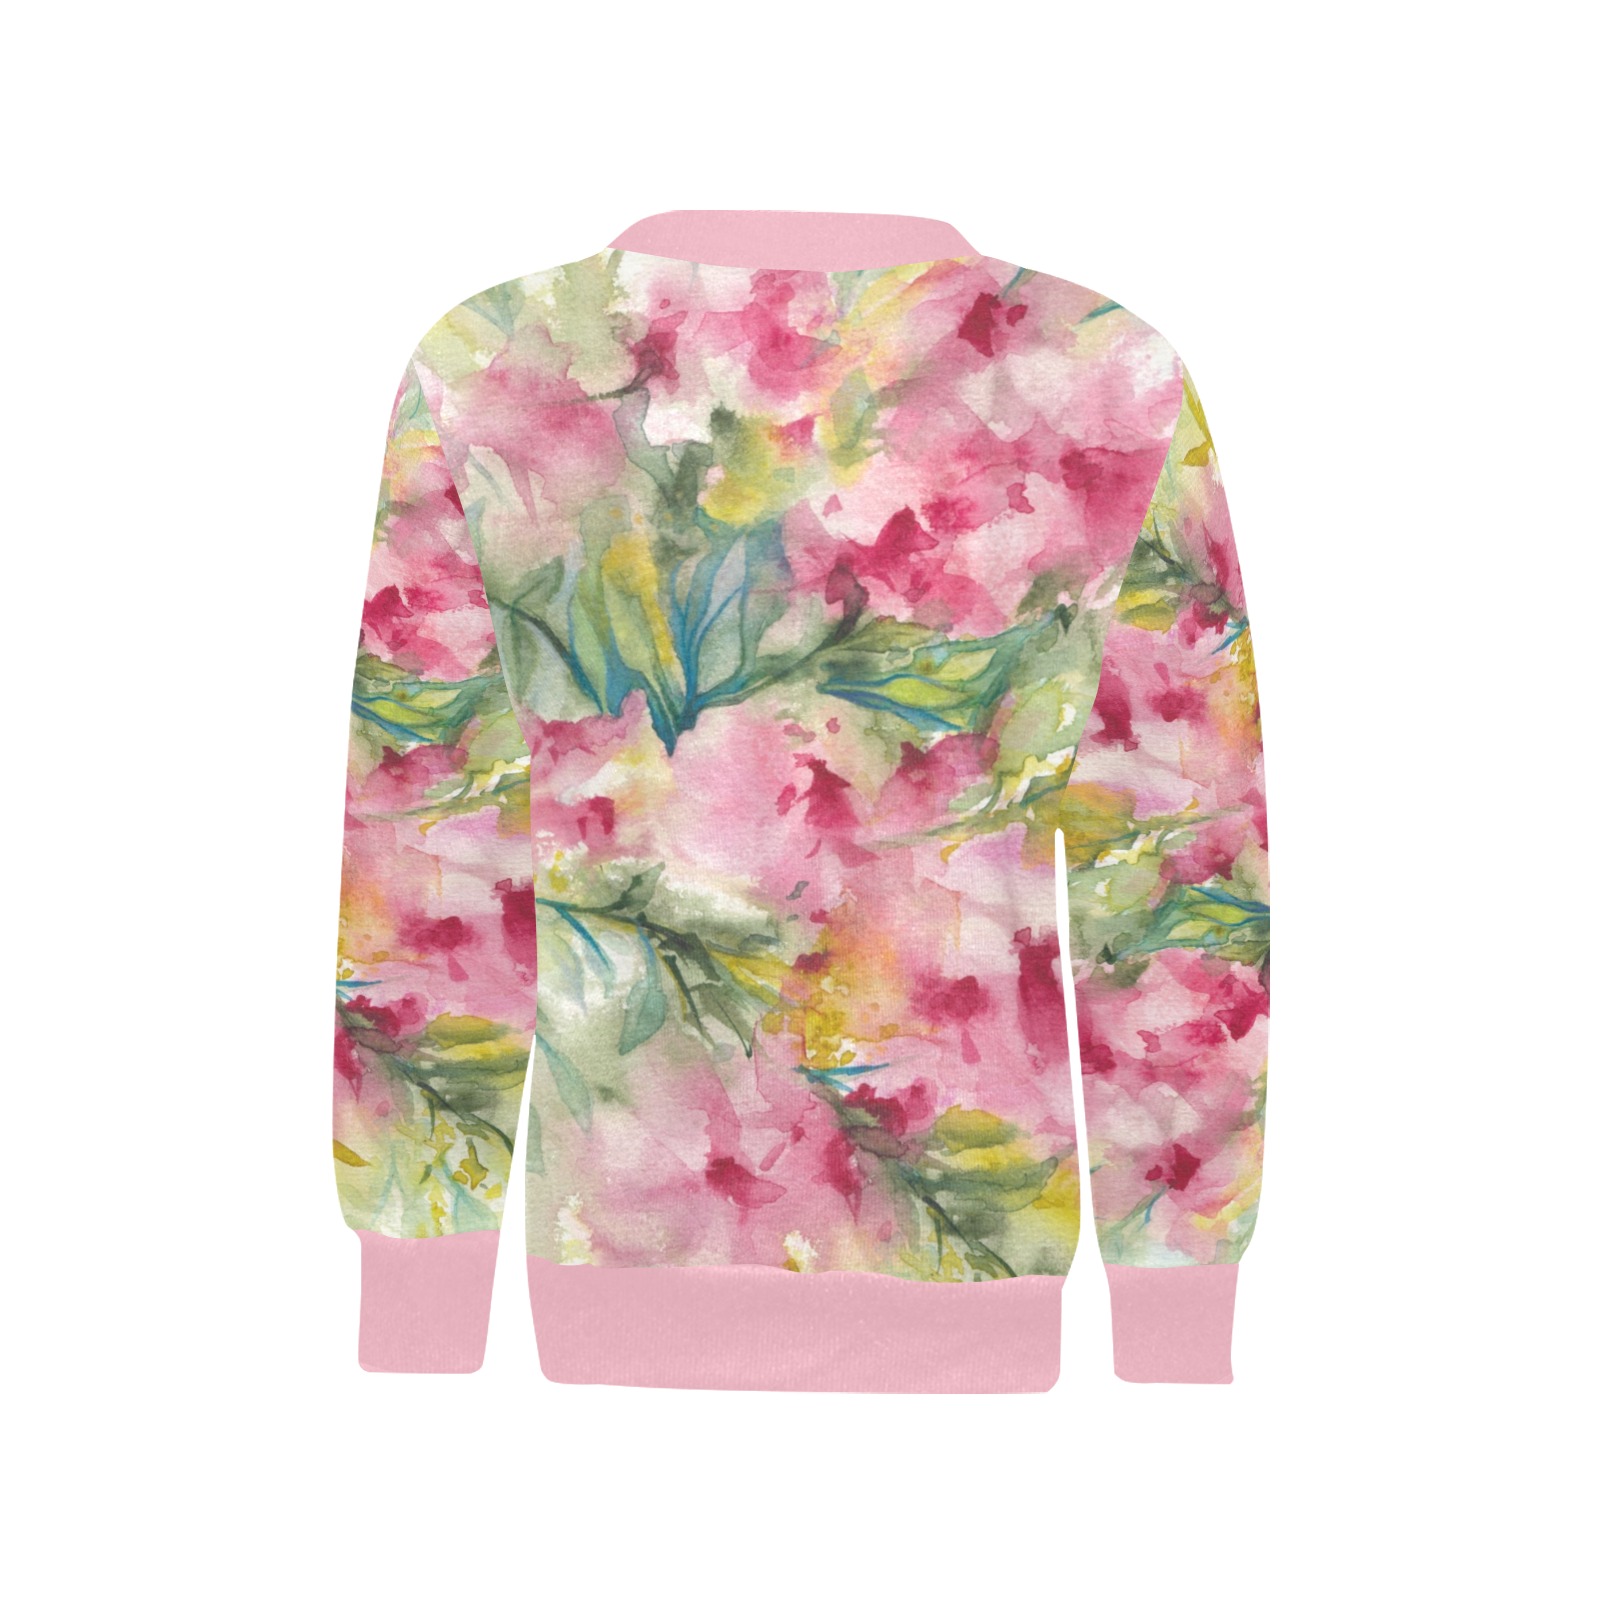 Pink Dreamy Floral Watercolor  Iva West Girls' All Over Print Crew Neck Sweater (Model H49)